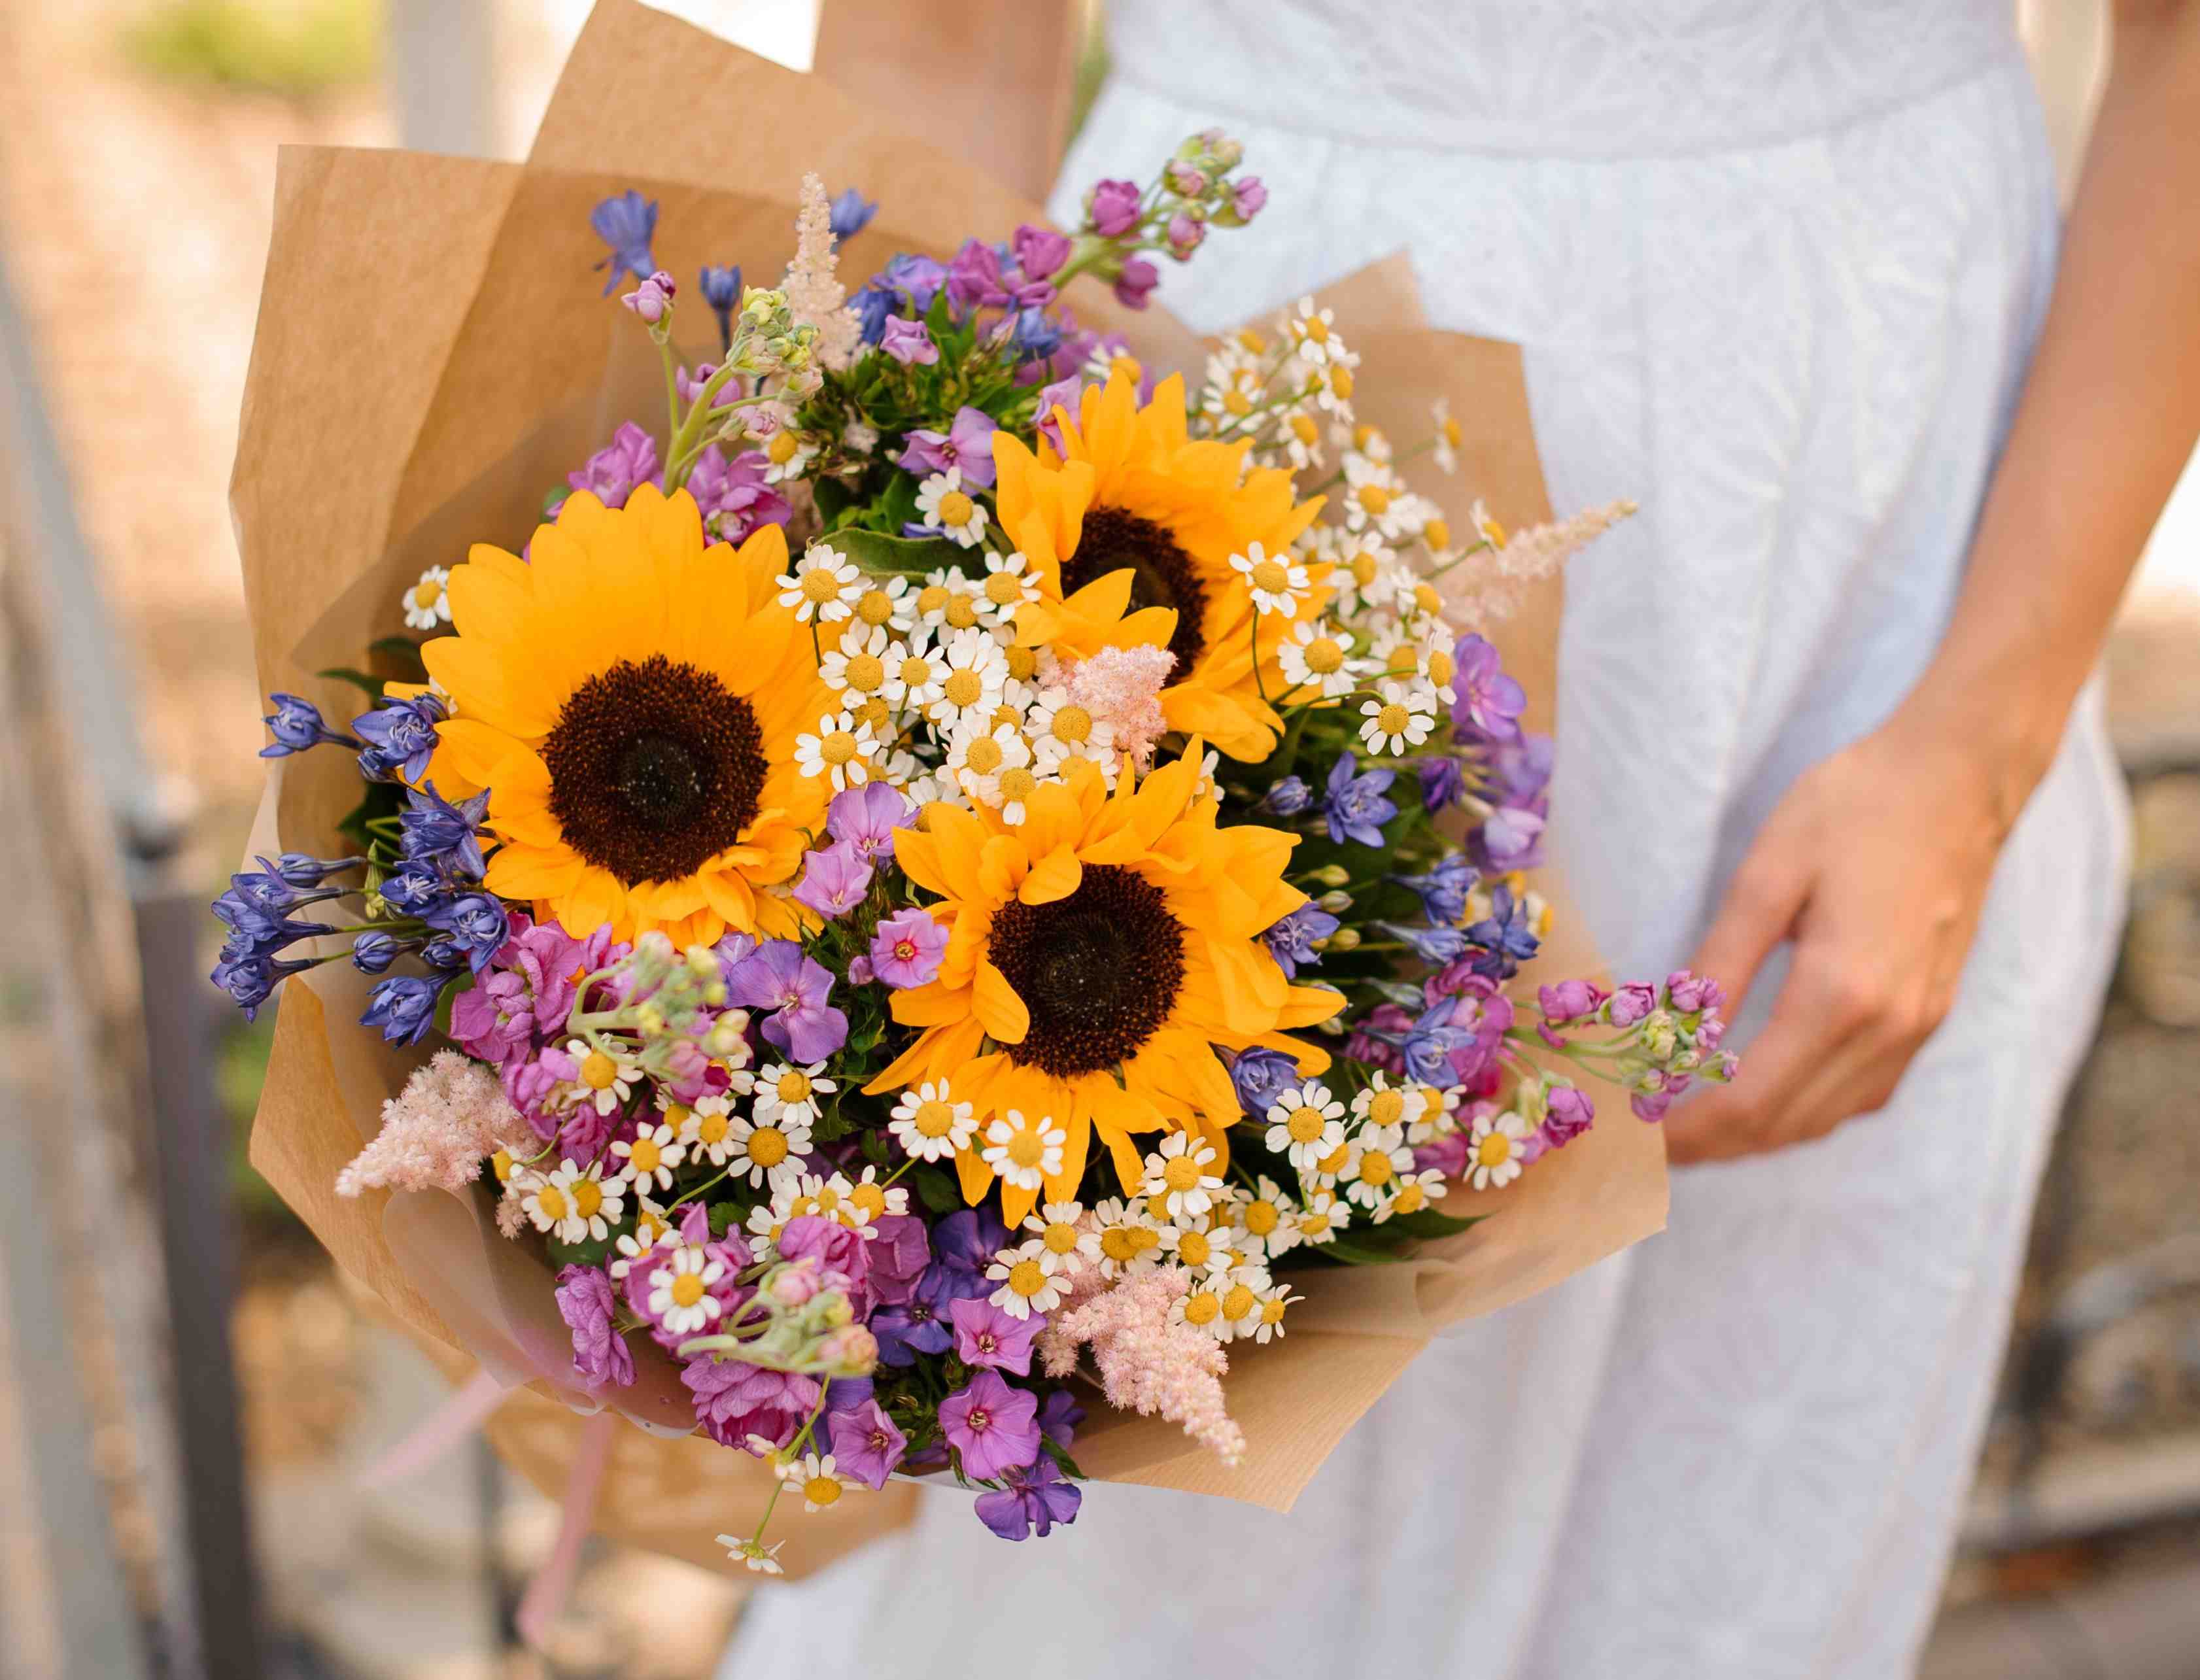 What Flowers Look Good With Sunflowers